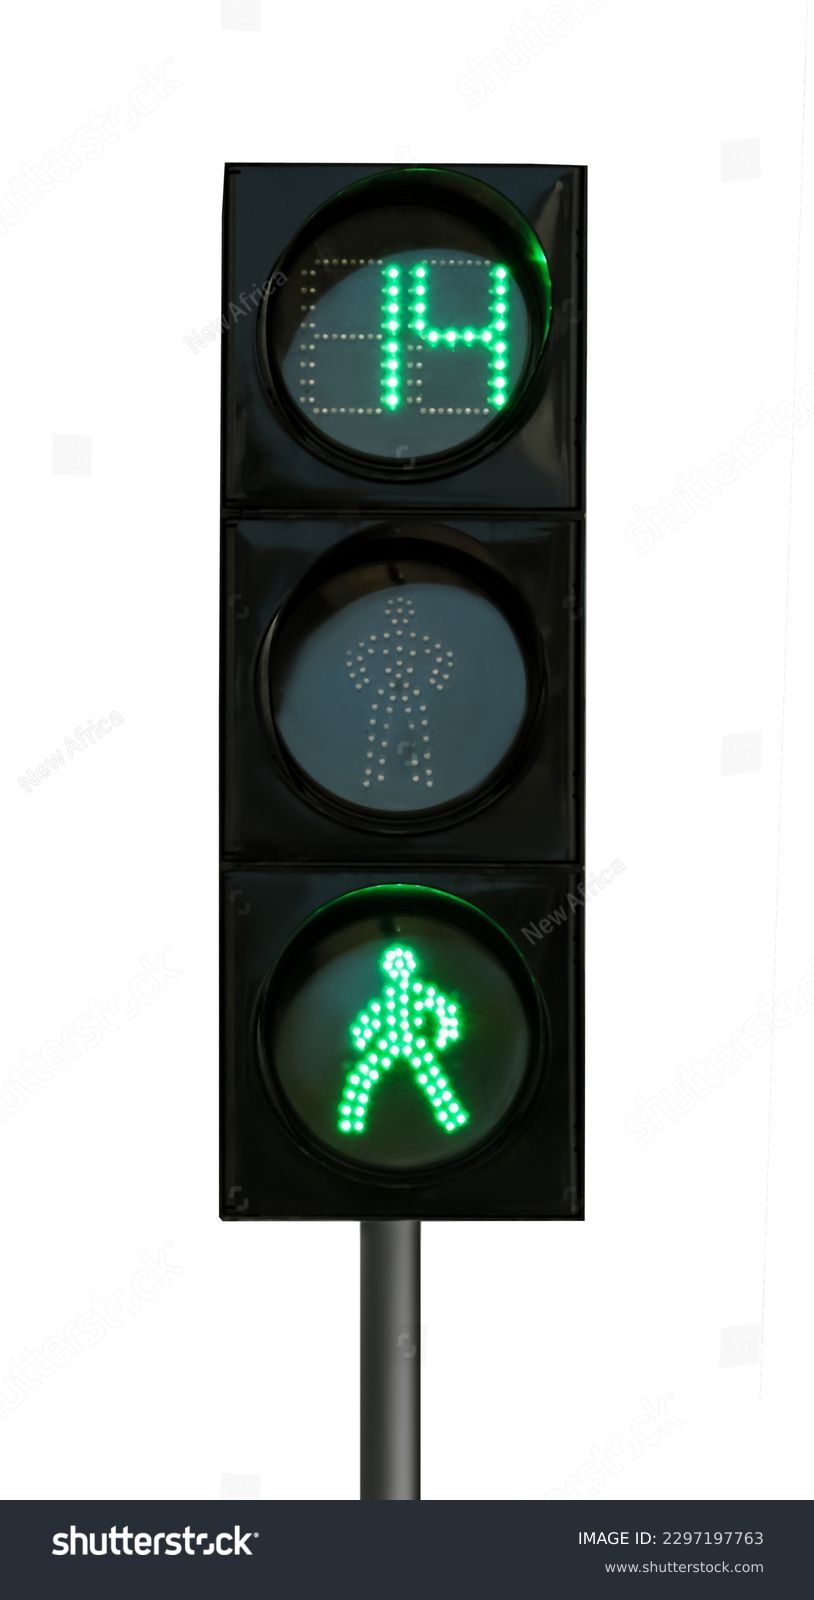 Modern traffic light with timer and pedestrian signals isolated on white #2297197763